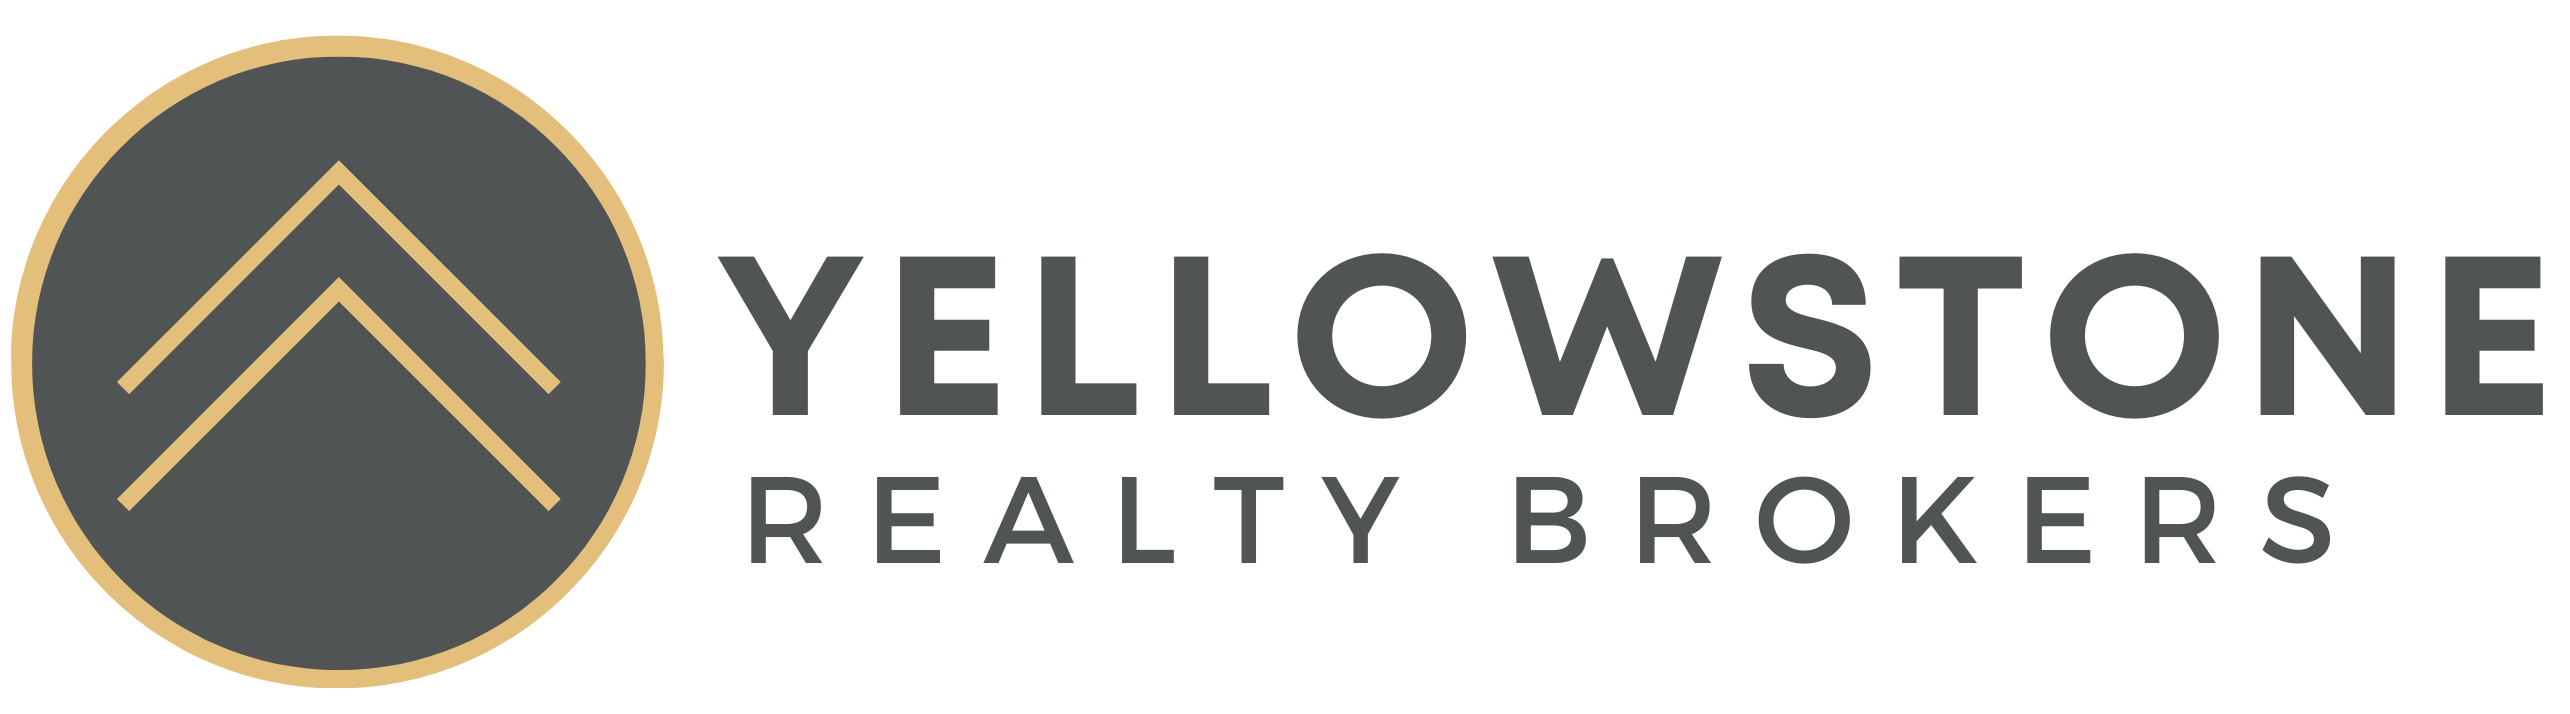 Yellowstone Realty Brokers 